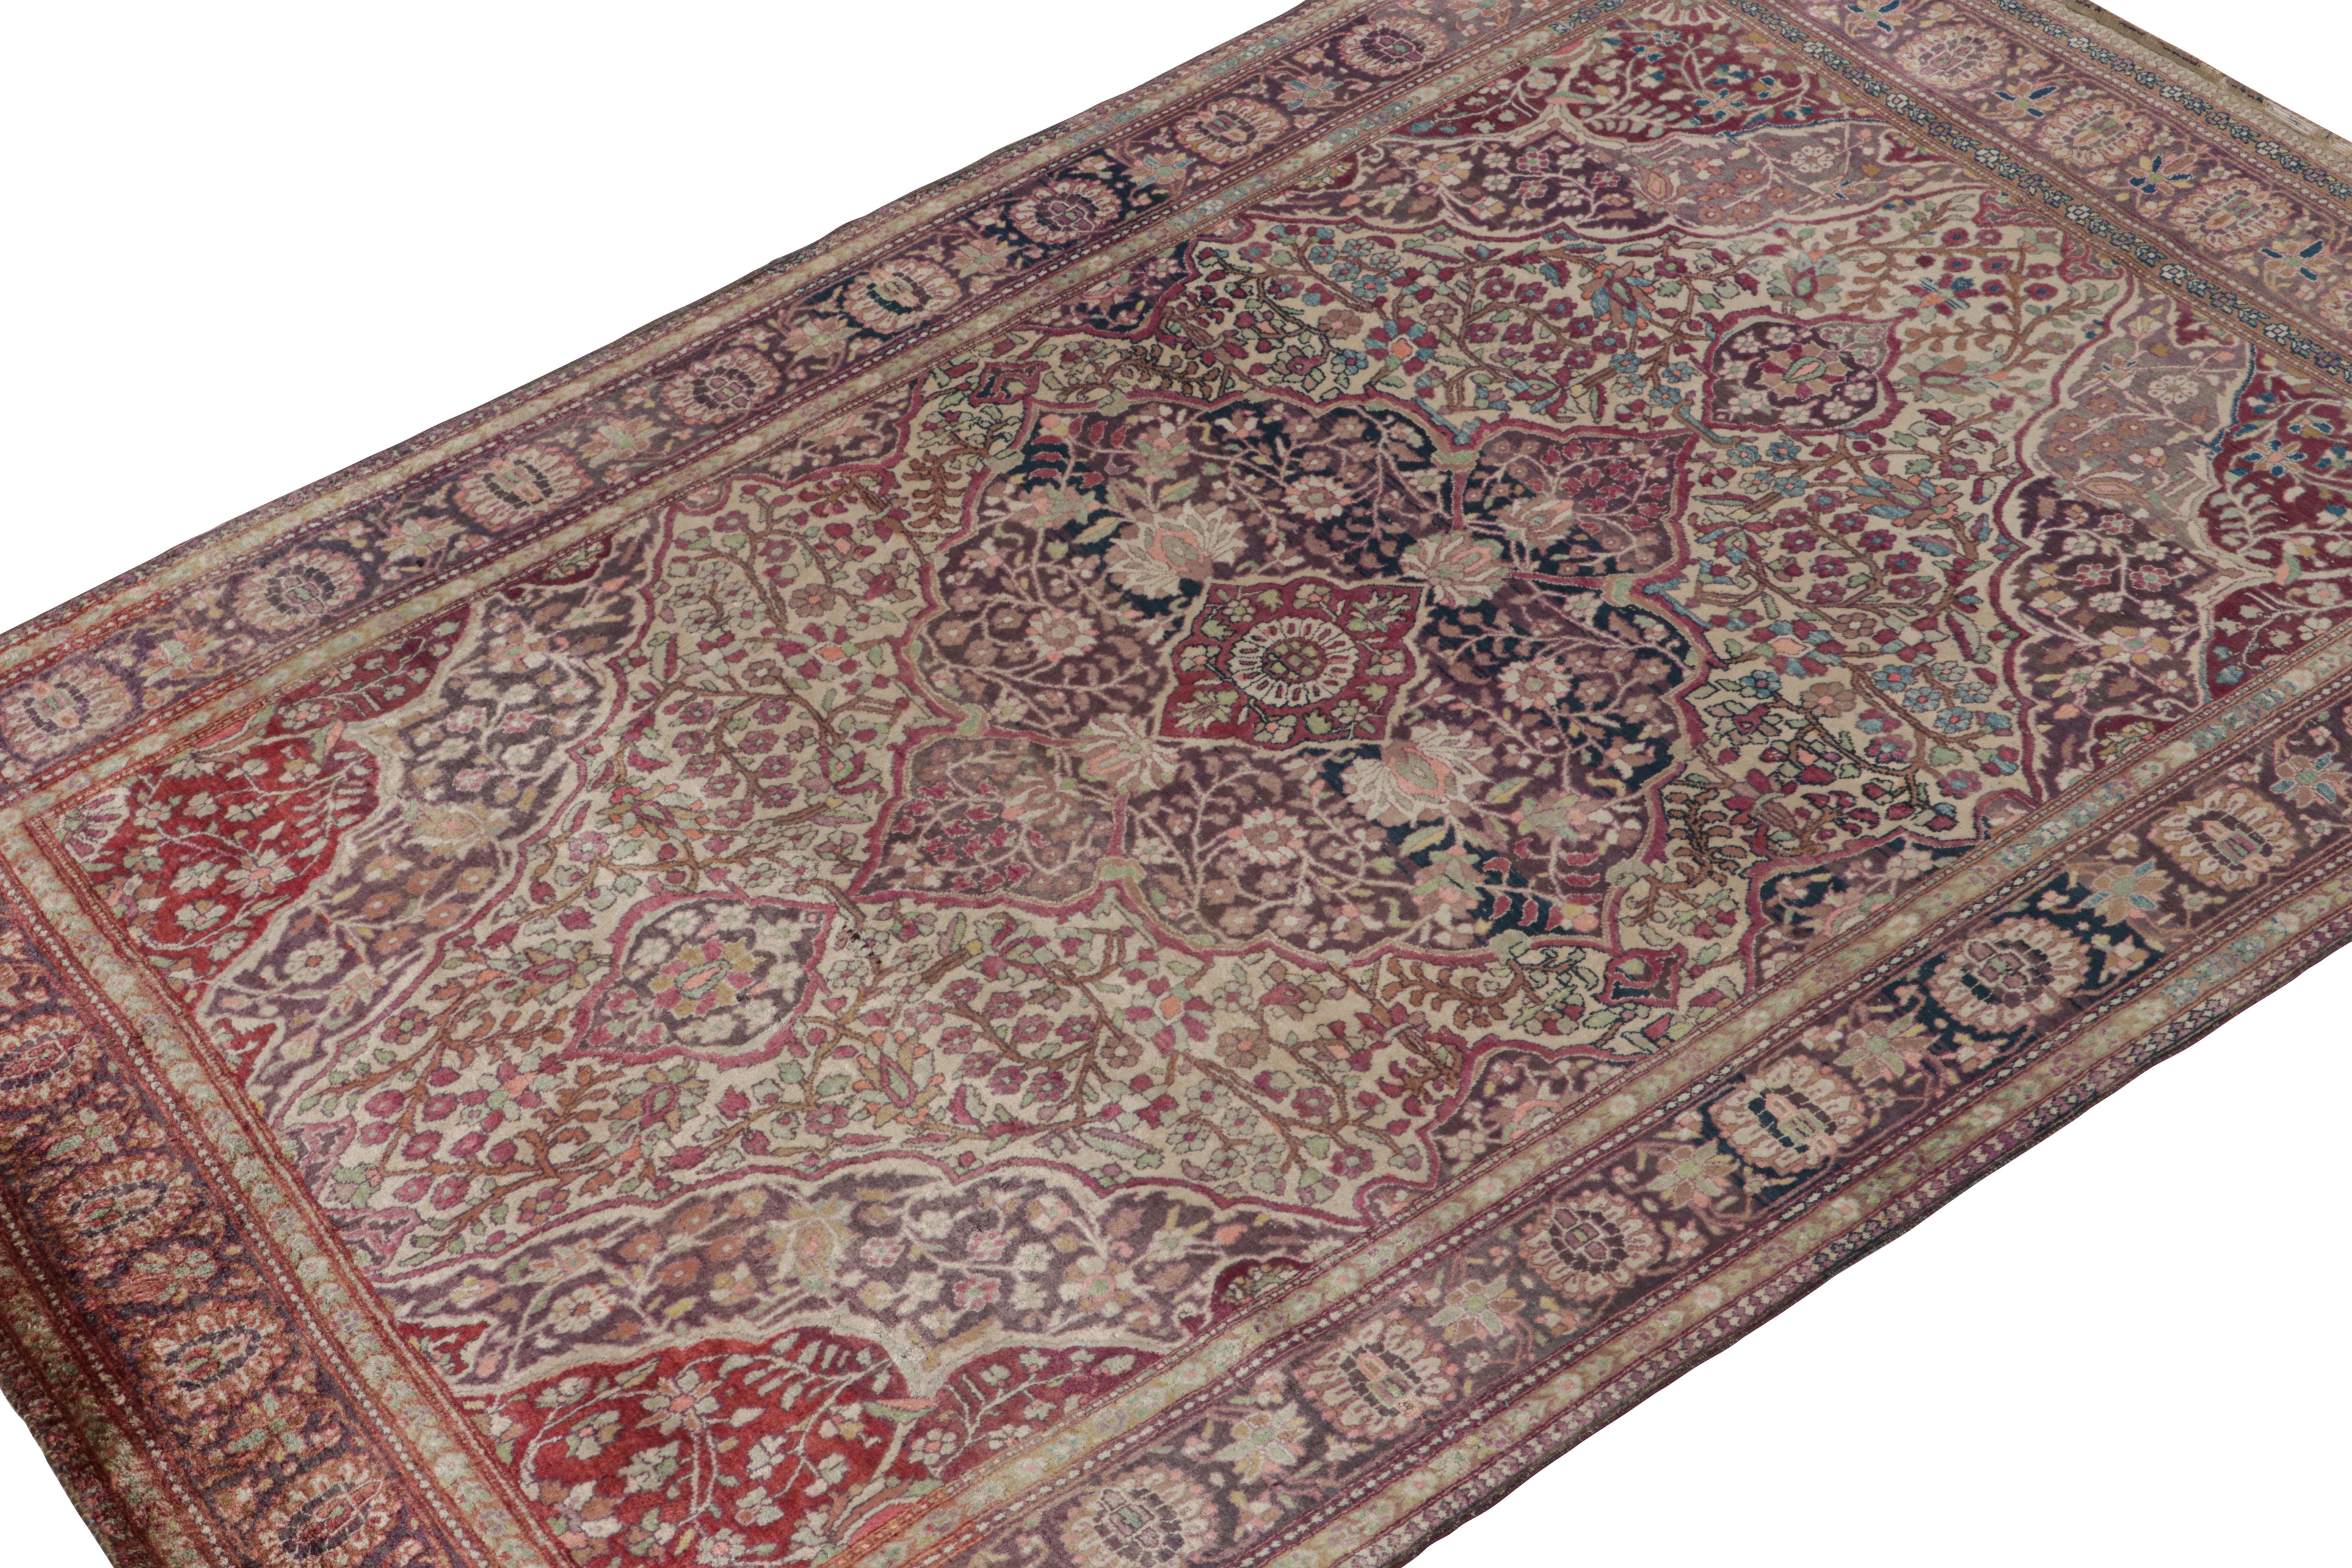 Hand-knotted in silk circa 1920, this item is a rare 3x5 antique Persian Kashan rug among Rug & Kilim’s latest acquisitions in Oriental rugs.

On the Design:

This piece enjoys a play of medallion and all over floral patterns, with several intricate